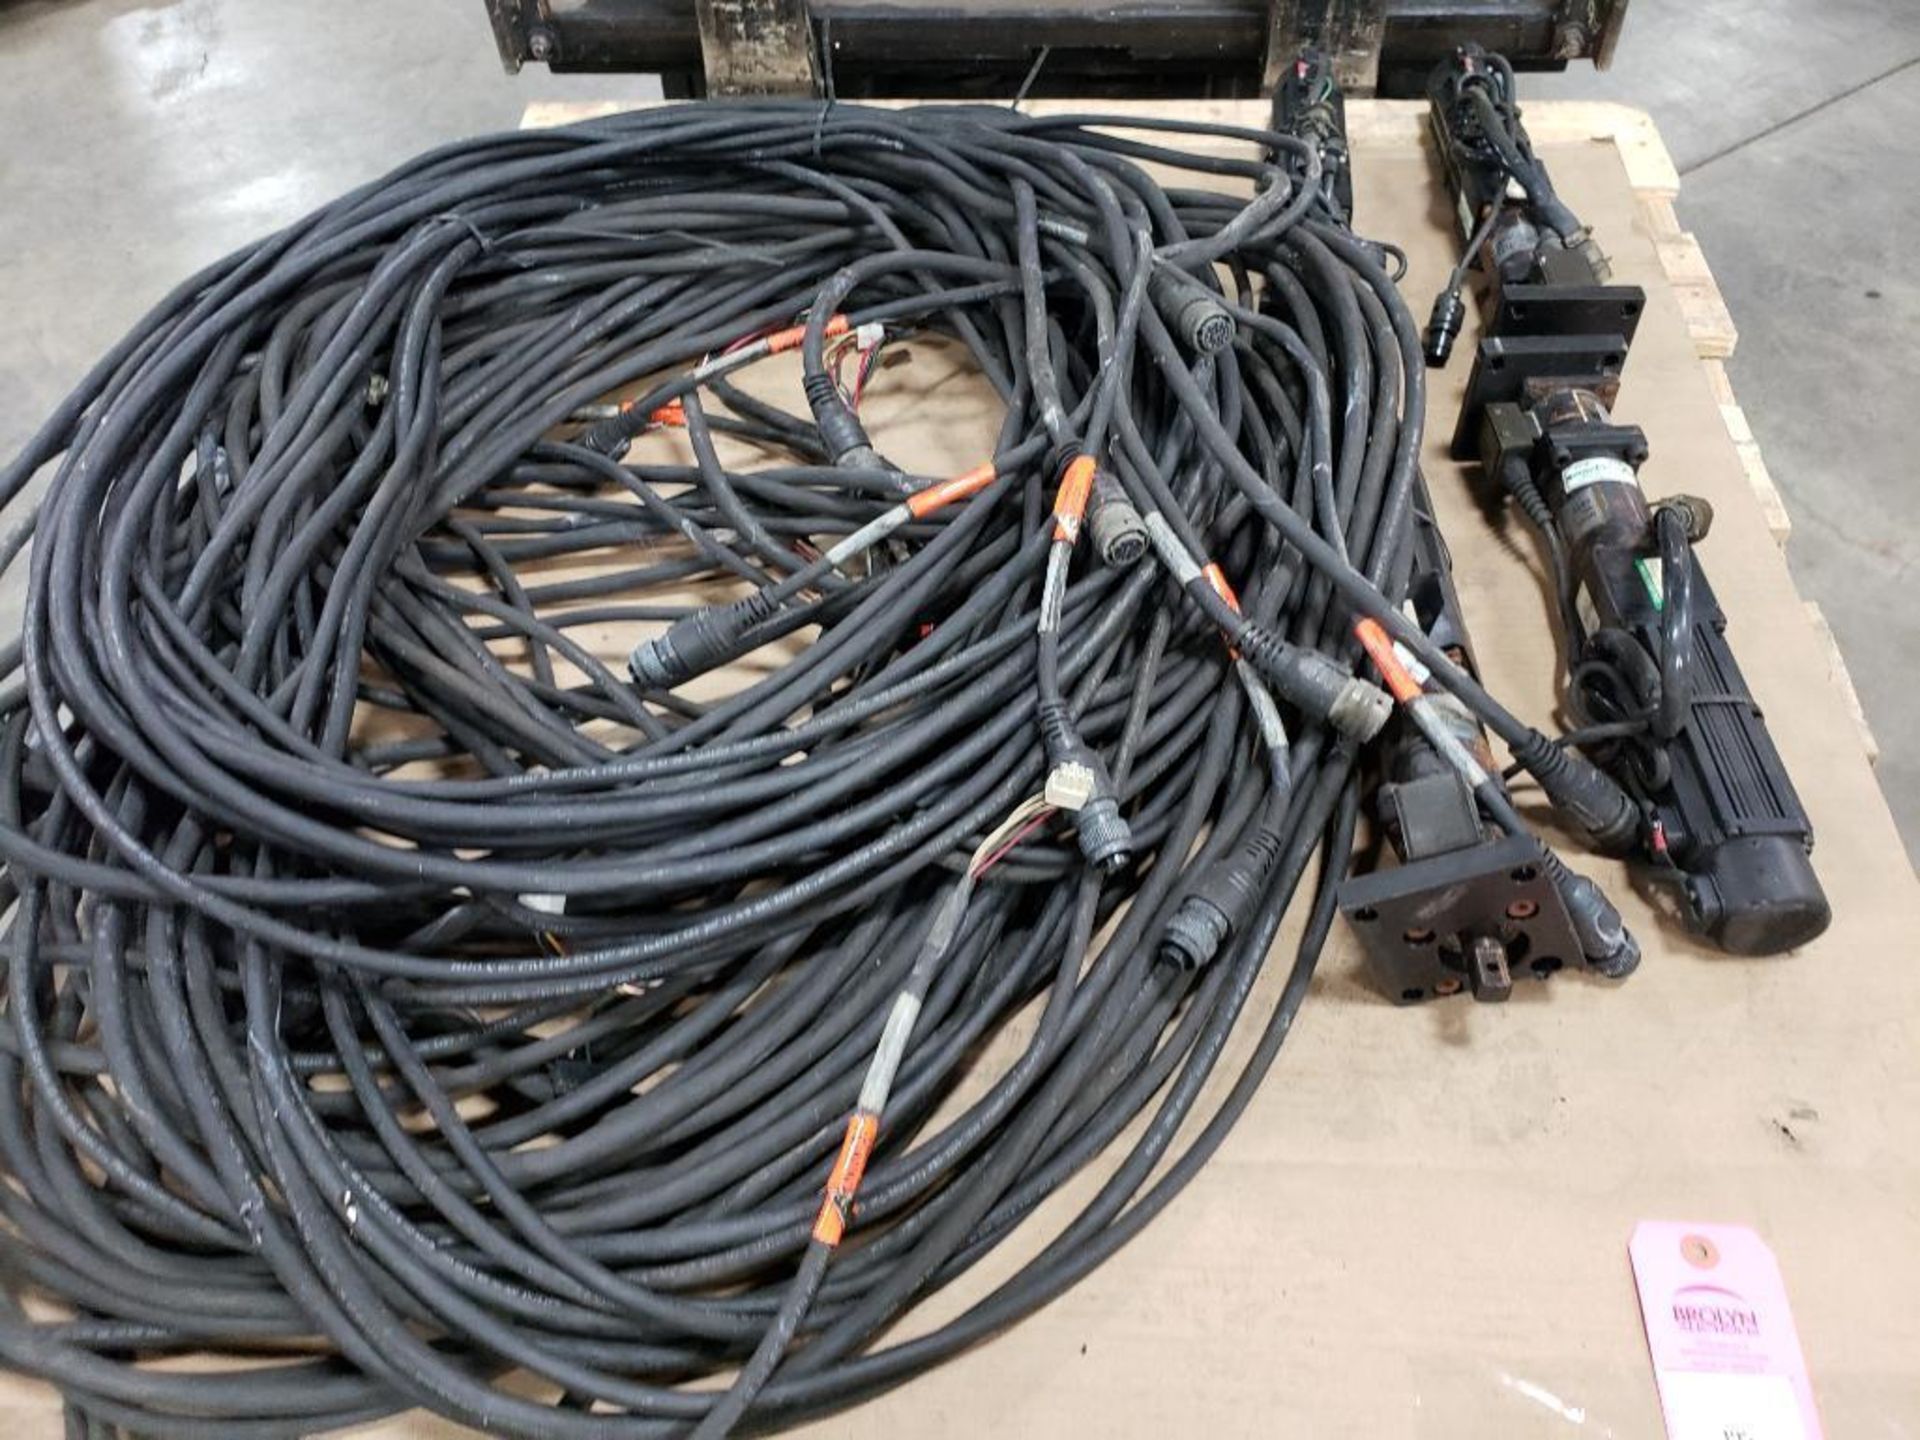 Qty 4 - FEC motorized nut runners NFT-202RM3-S and connection cords. 0.64Nm-Torque. - Image 2 of 16